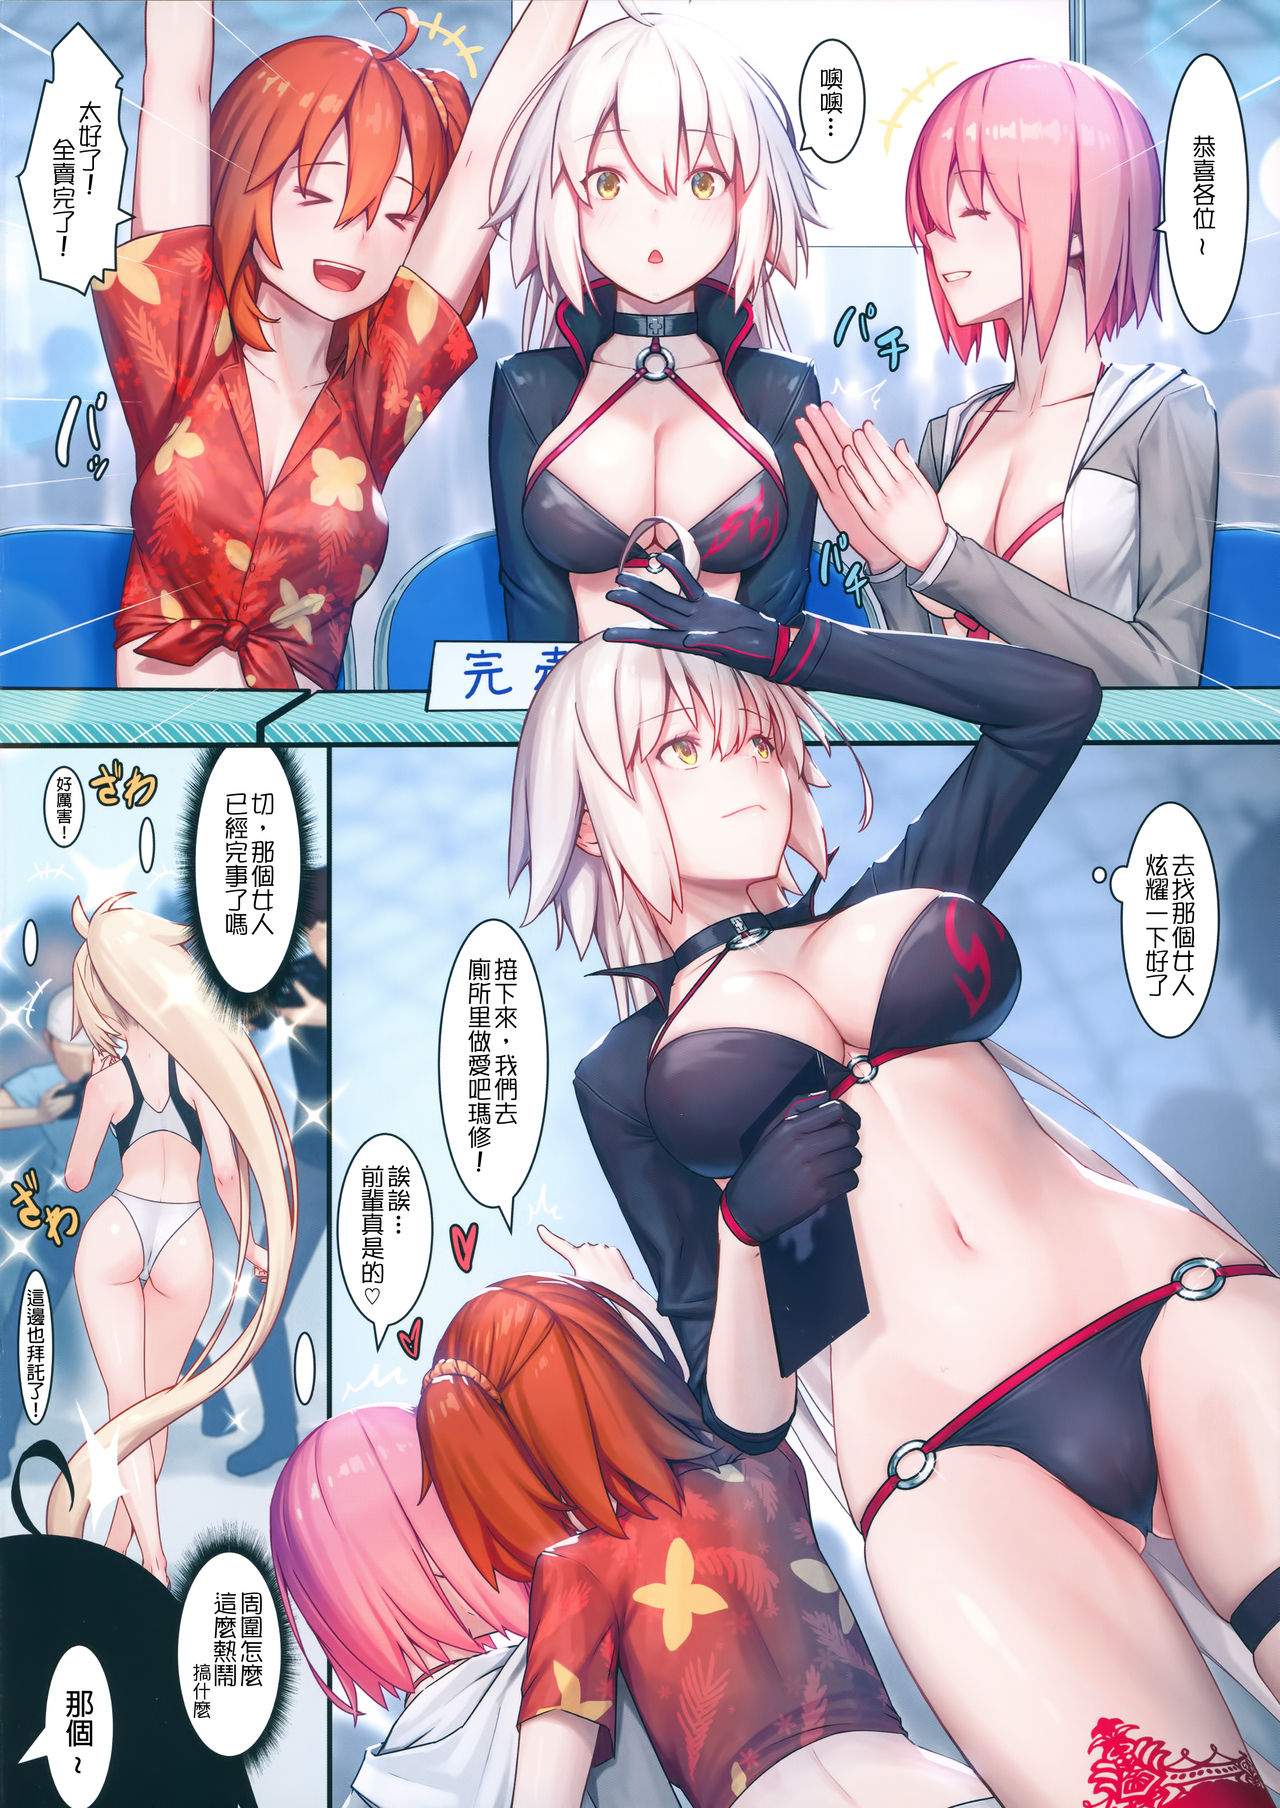 (C95) [Kenja Time (MANA)] Fate/Gentle Order 4 "Alter" (Fate/Grand Order) [Chinese] [谜之汉化组X·Alter&无毒气汉化组] (C95) [けんじゃたいむ (MANA)] Fate/Gentle Order 4「オルタ」 (Fate/Grand Order) [中国翻訳]